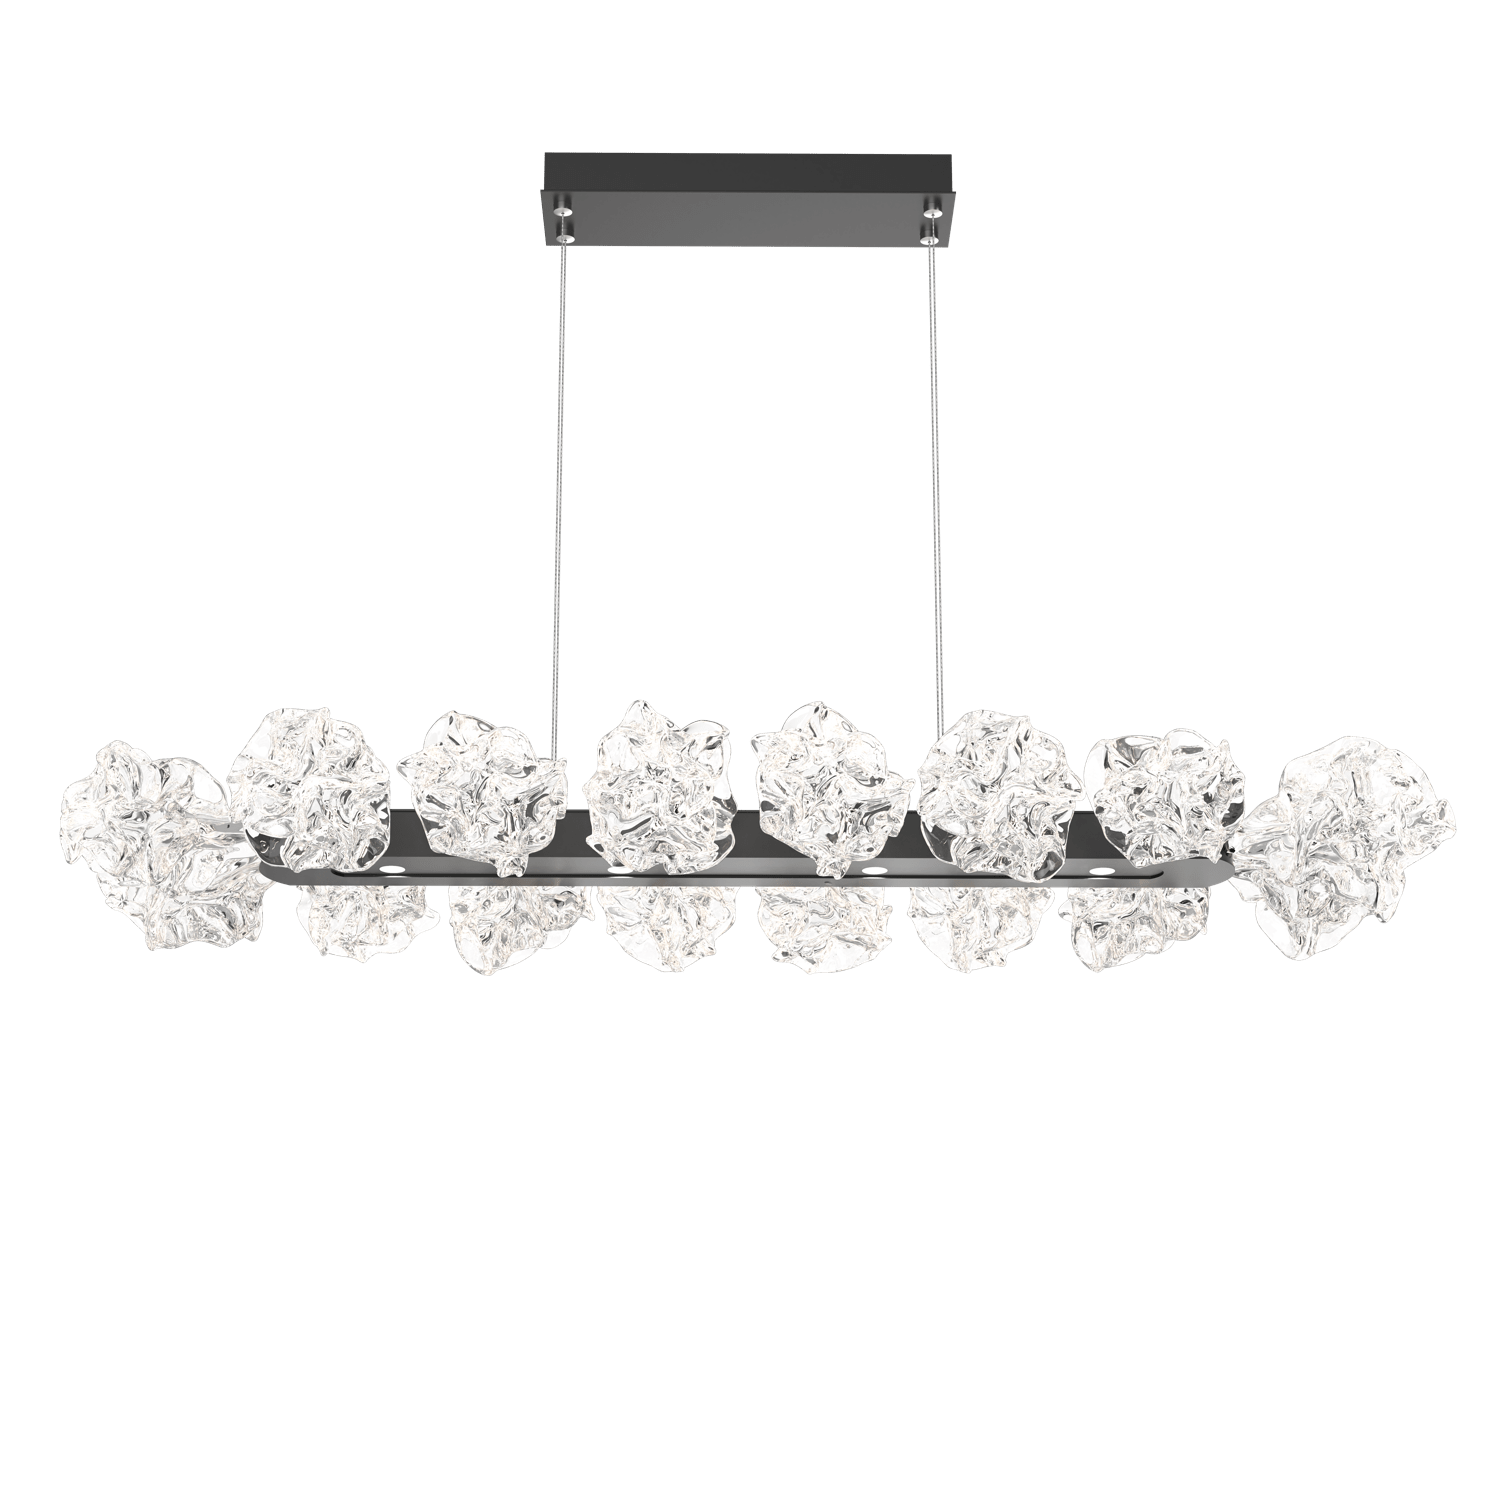 PLB0059-48-MB-Hammerton-Studio-Blossom-48-inch-linear-chandelier-with-matte-black-finish-and-clear-handblown-crystal-glass-shades-and-LED-lamping